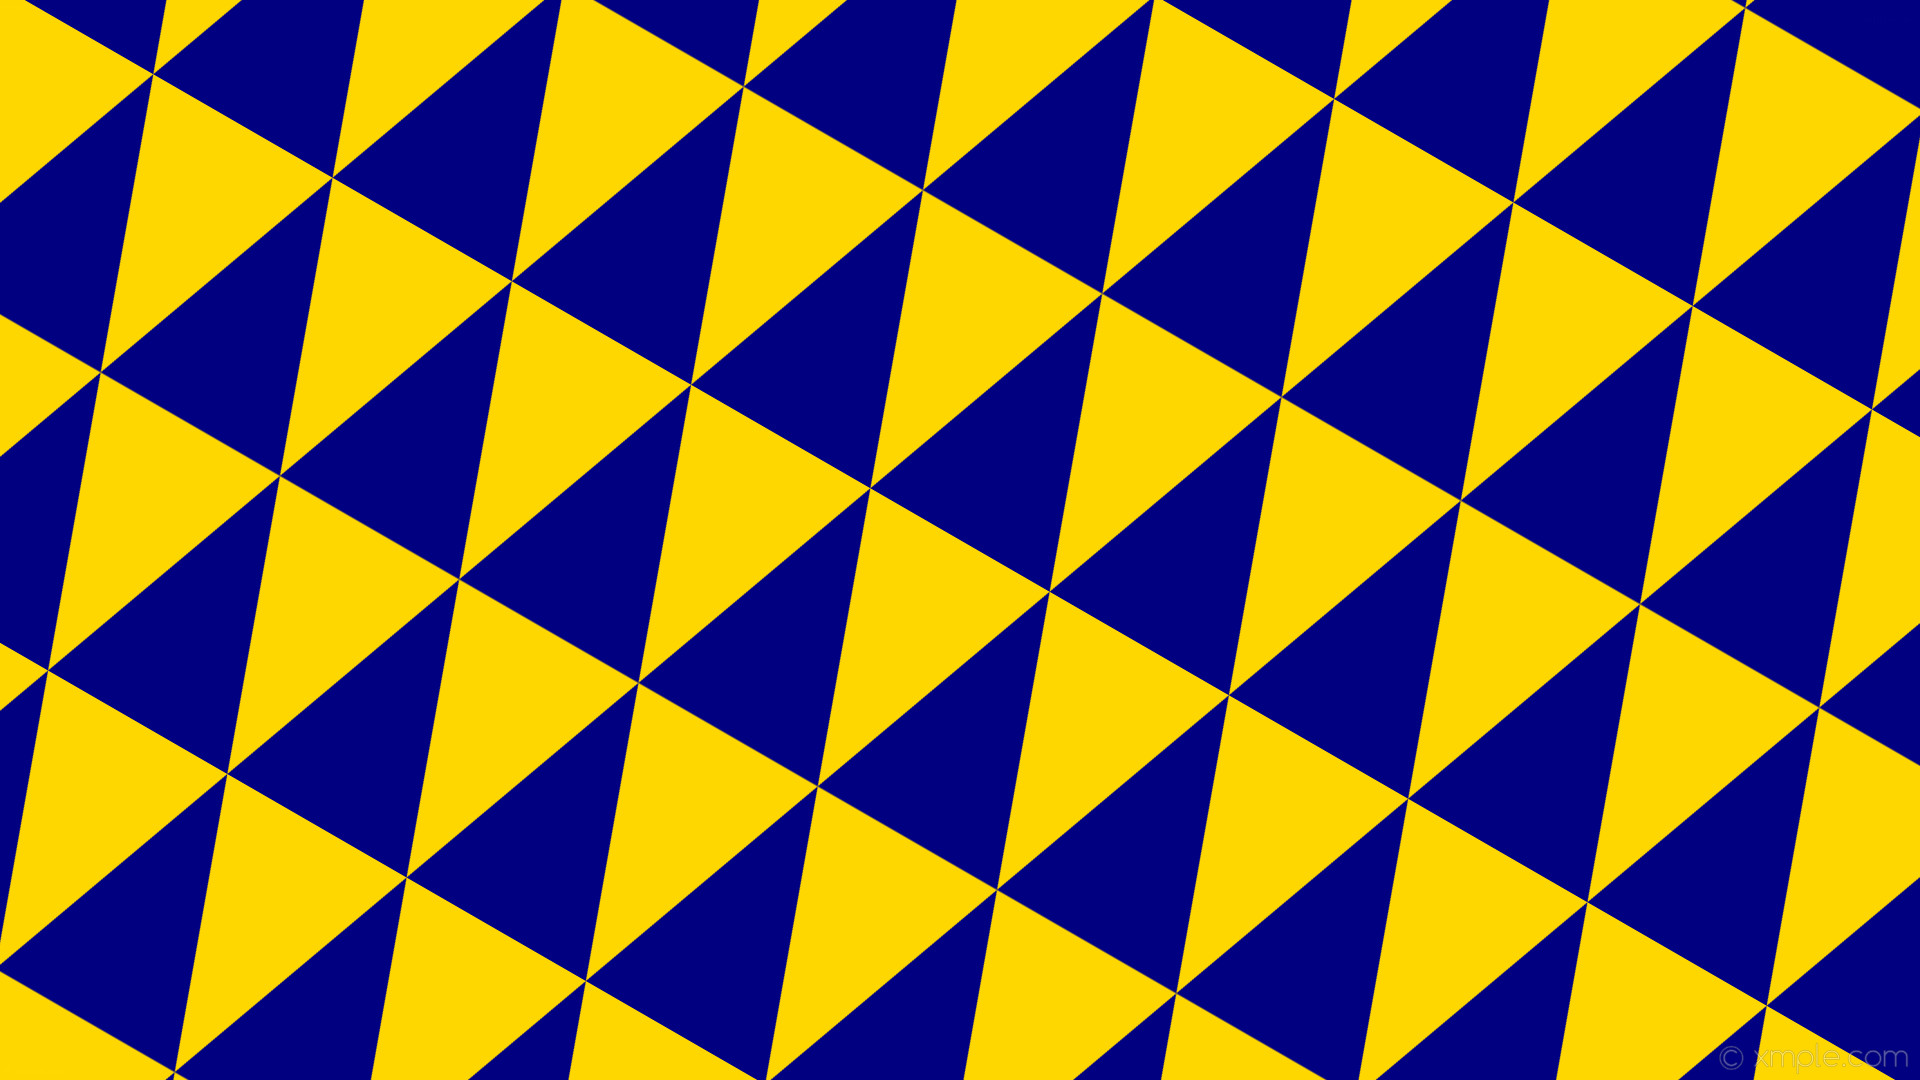 wallpaper blue yellow triangle gold navy #ffd700 #000080 330Â° 207px 569px